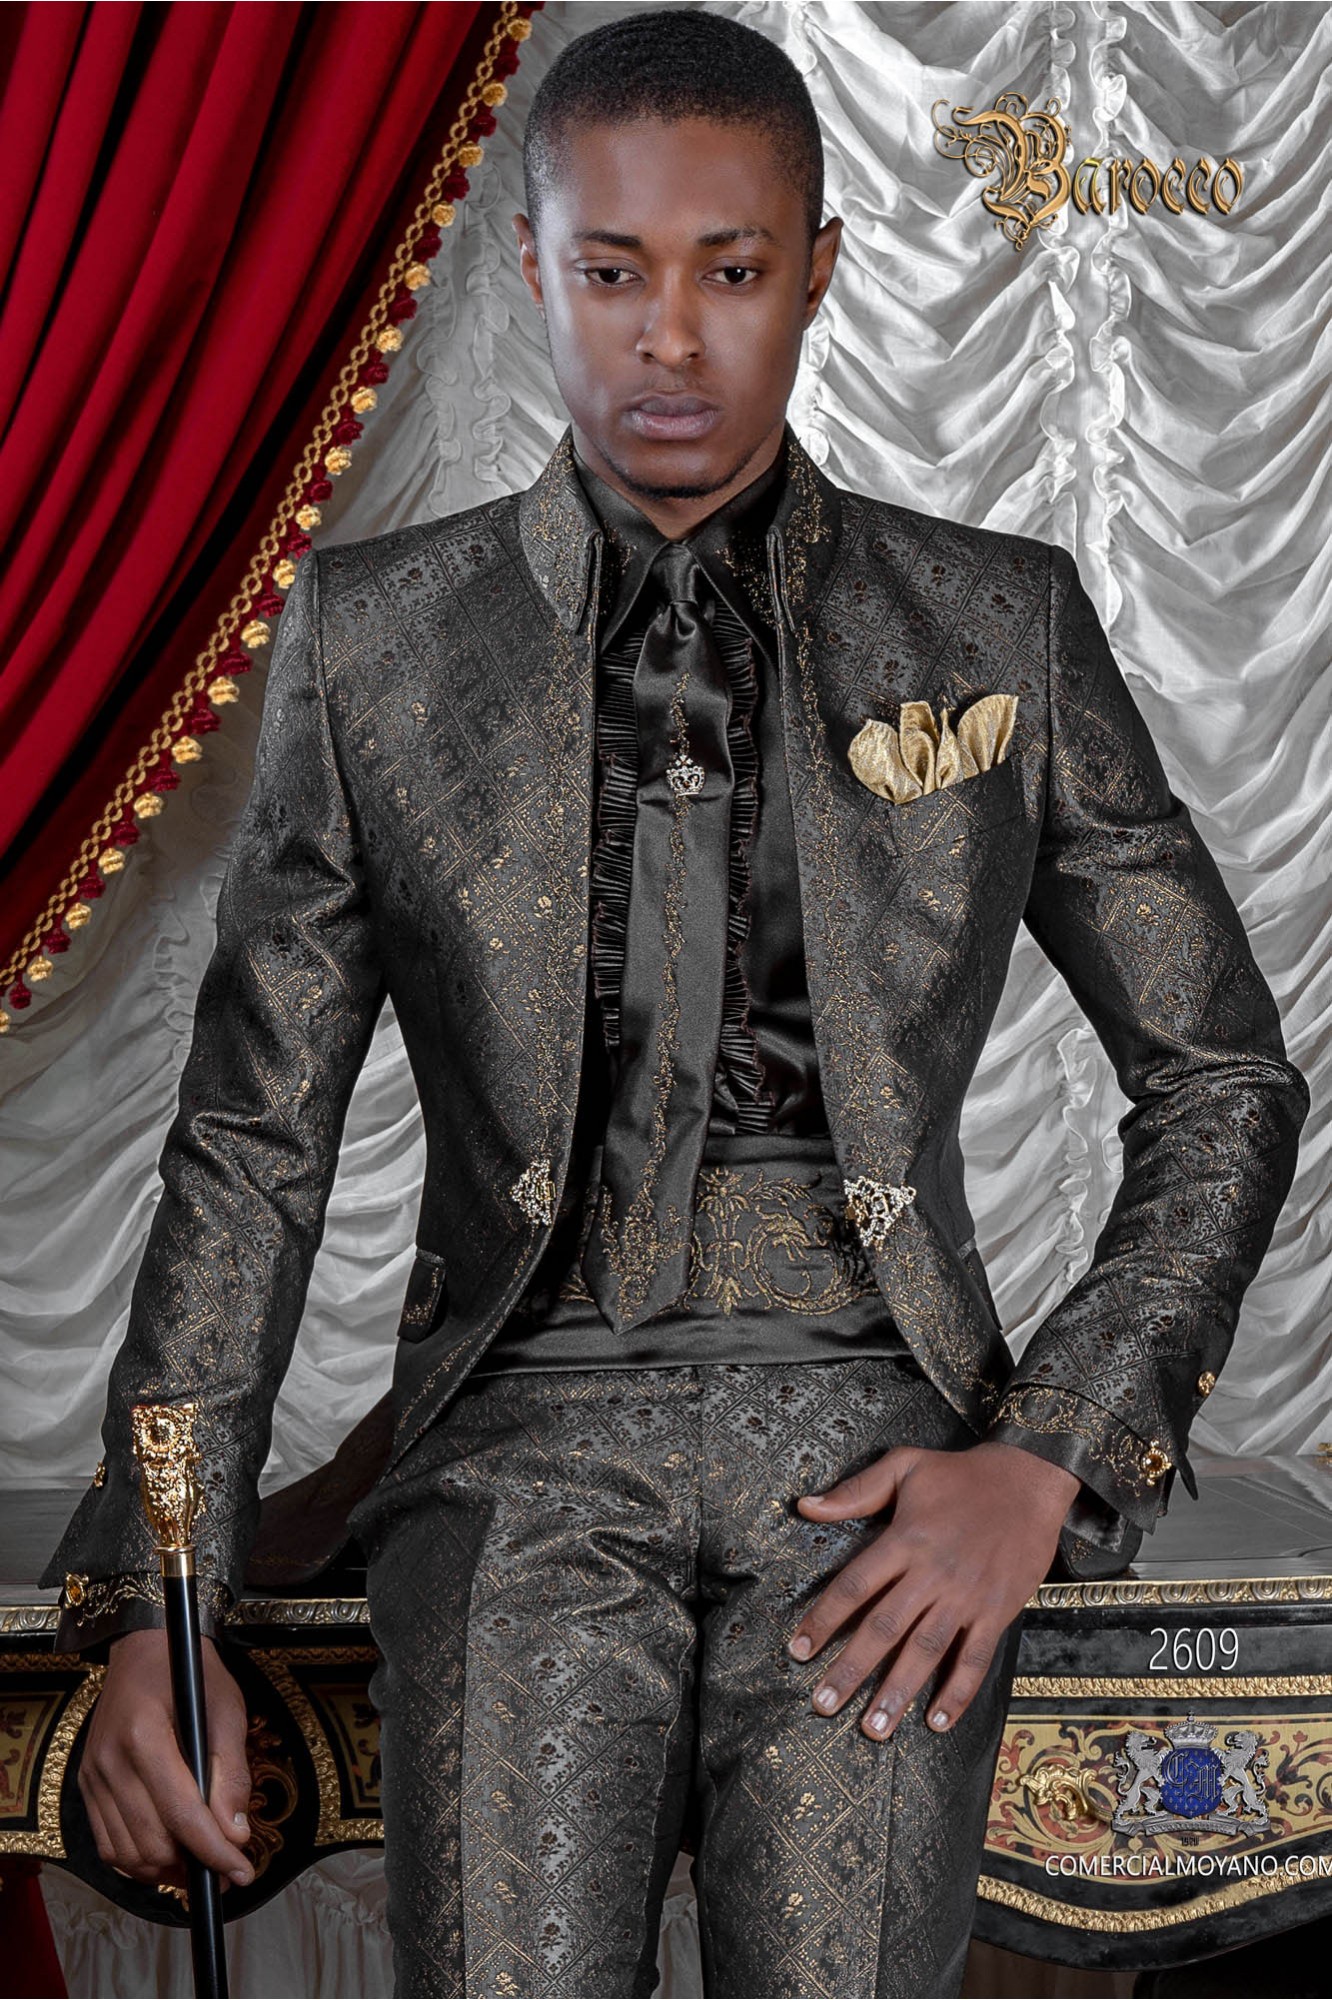 Baroque groom suit, vintage Napoleon collar frock coat in gray-gold jacquard fabric with golden embroidery model 2609 Mario Moyano